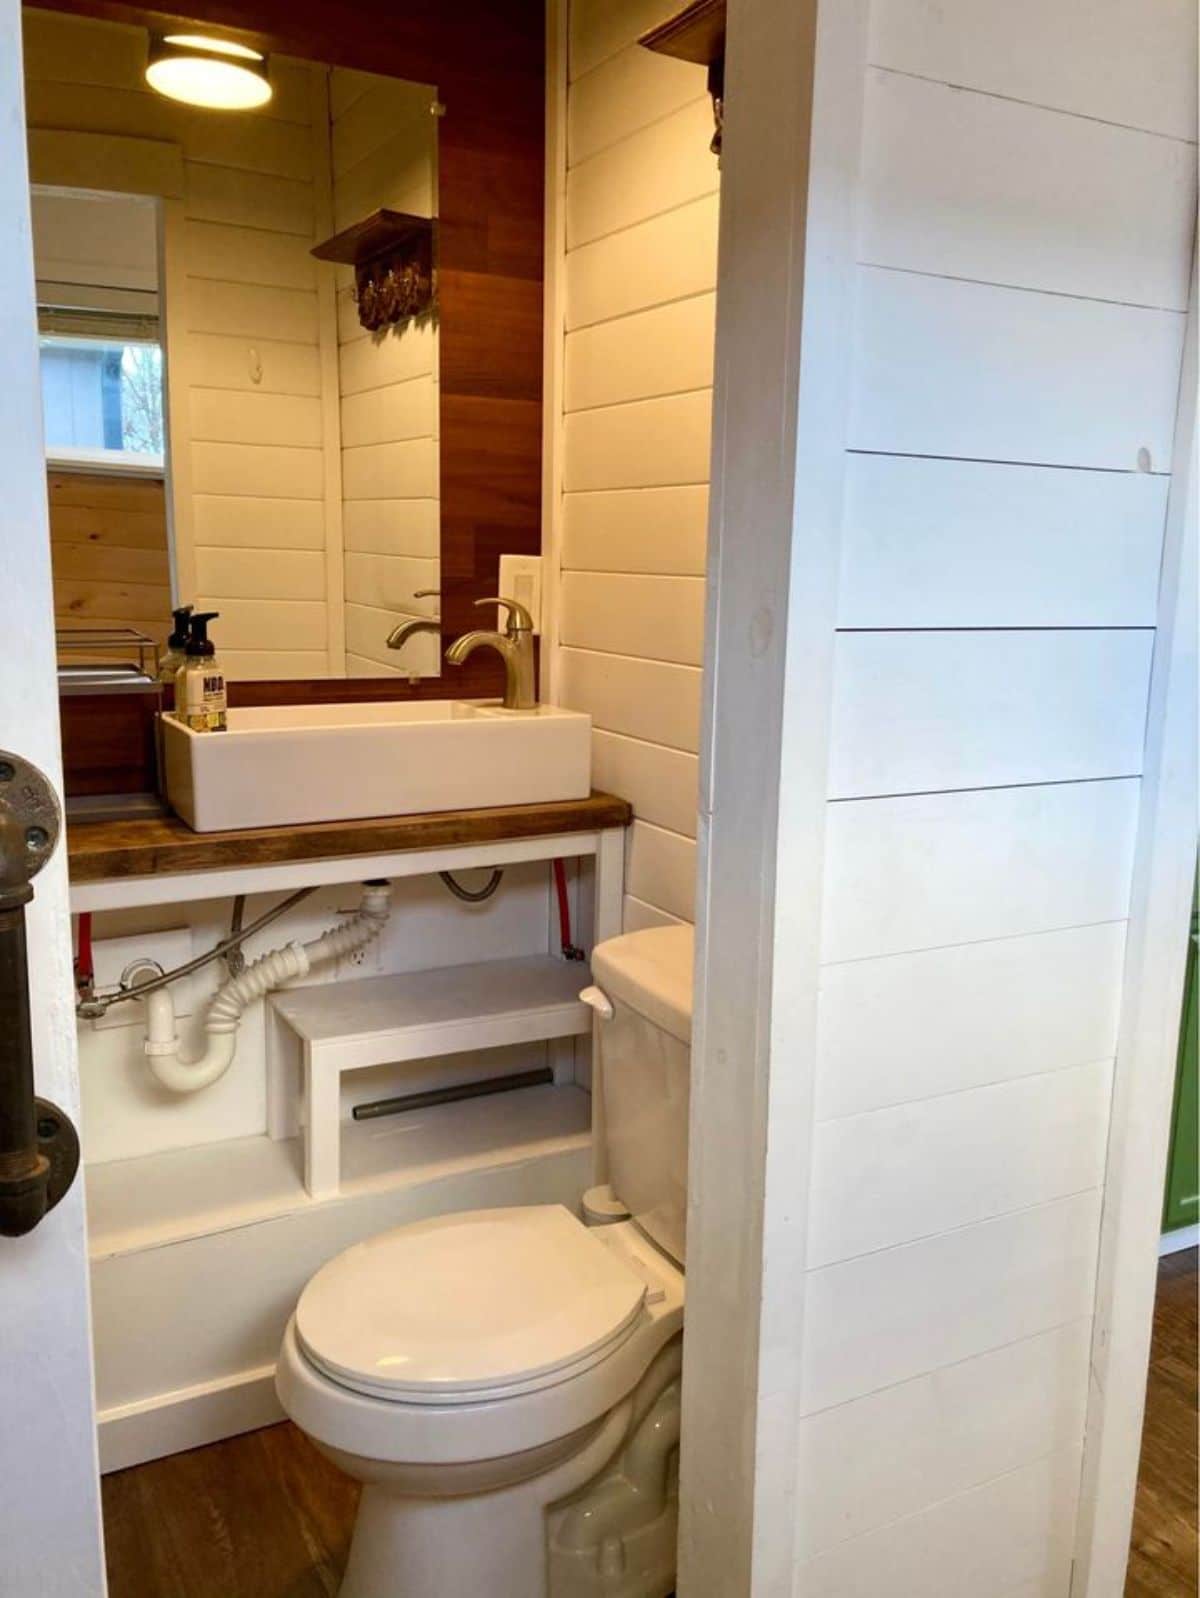 decent-sized bathroom and a regular flushing toilet with a bathroom sink